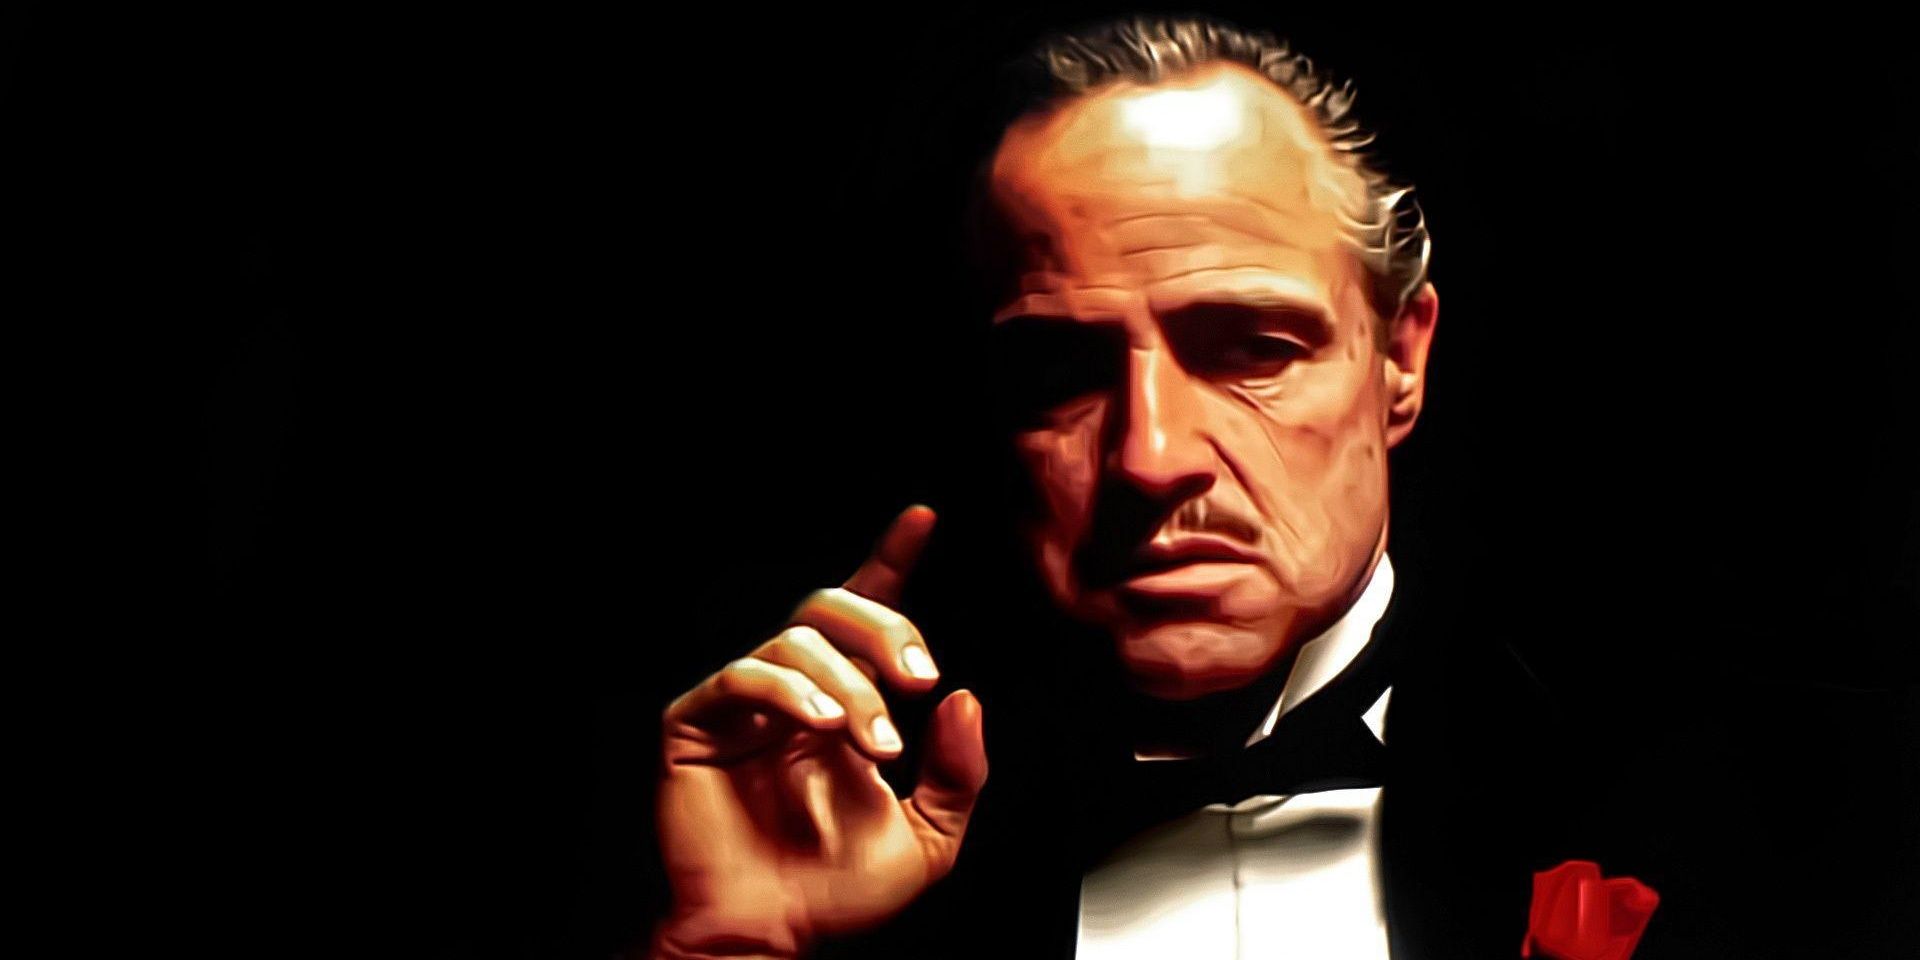 Don Corleone from The Godfather